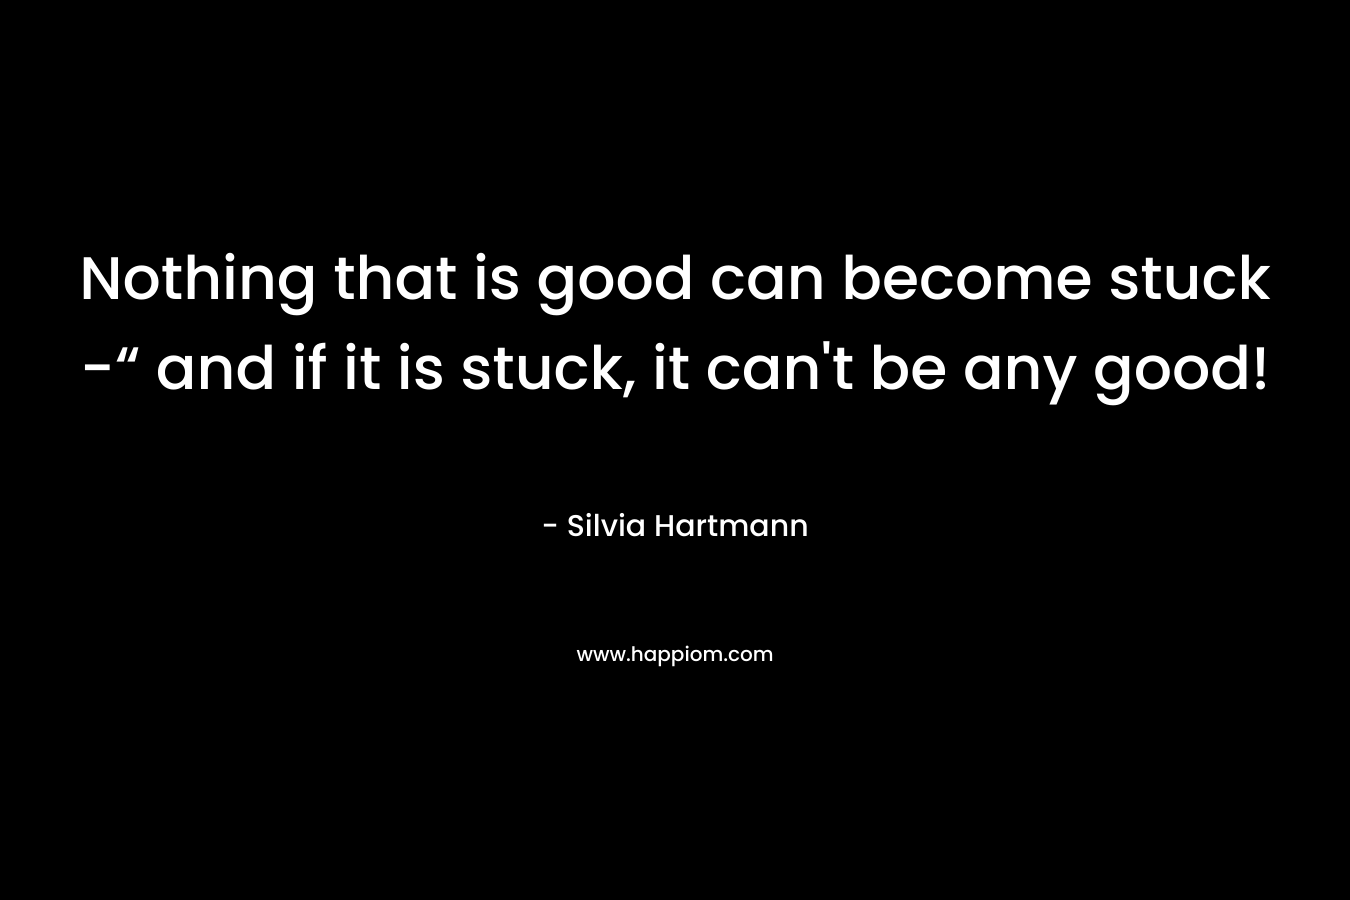 Nothing that is good can become stuck -“ and if it is stuck, it can’t be any good! – Silvia Hartmann